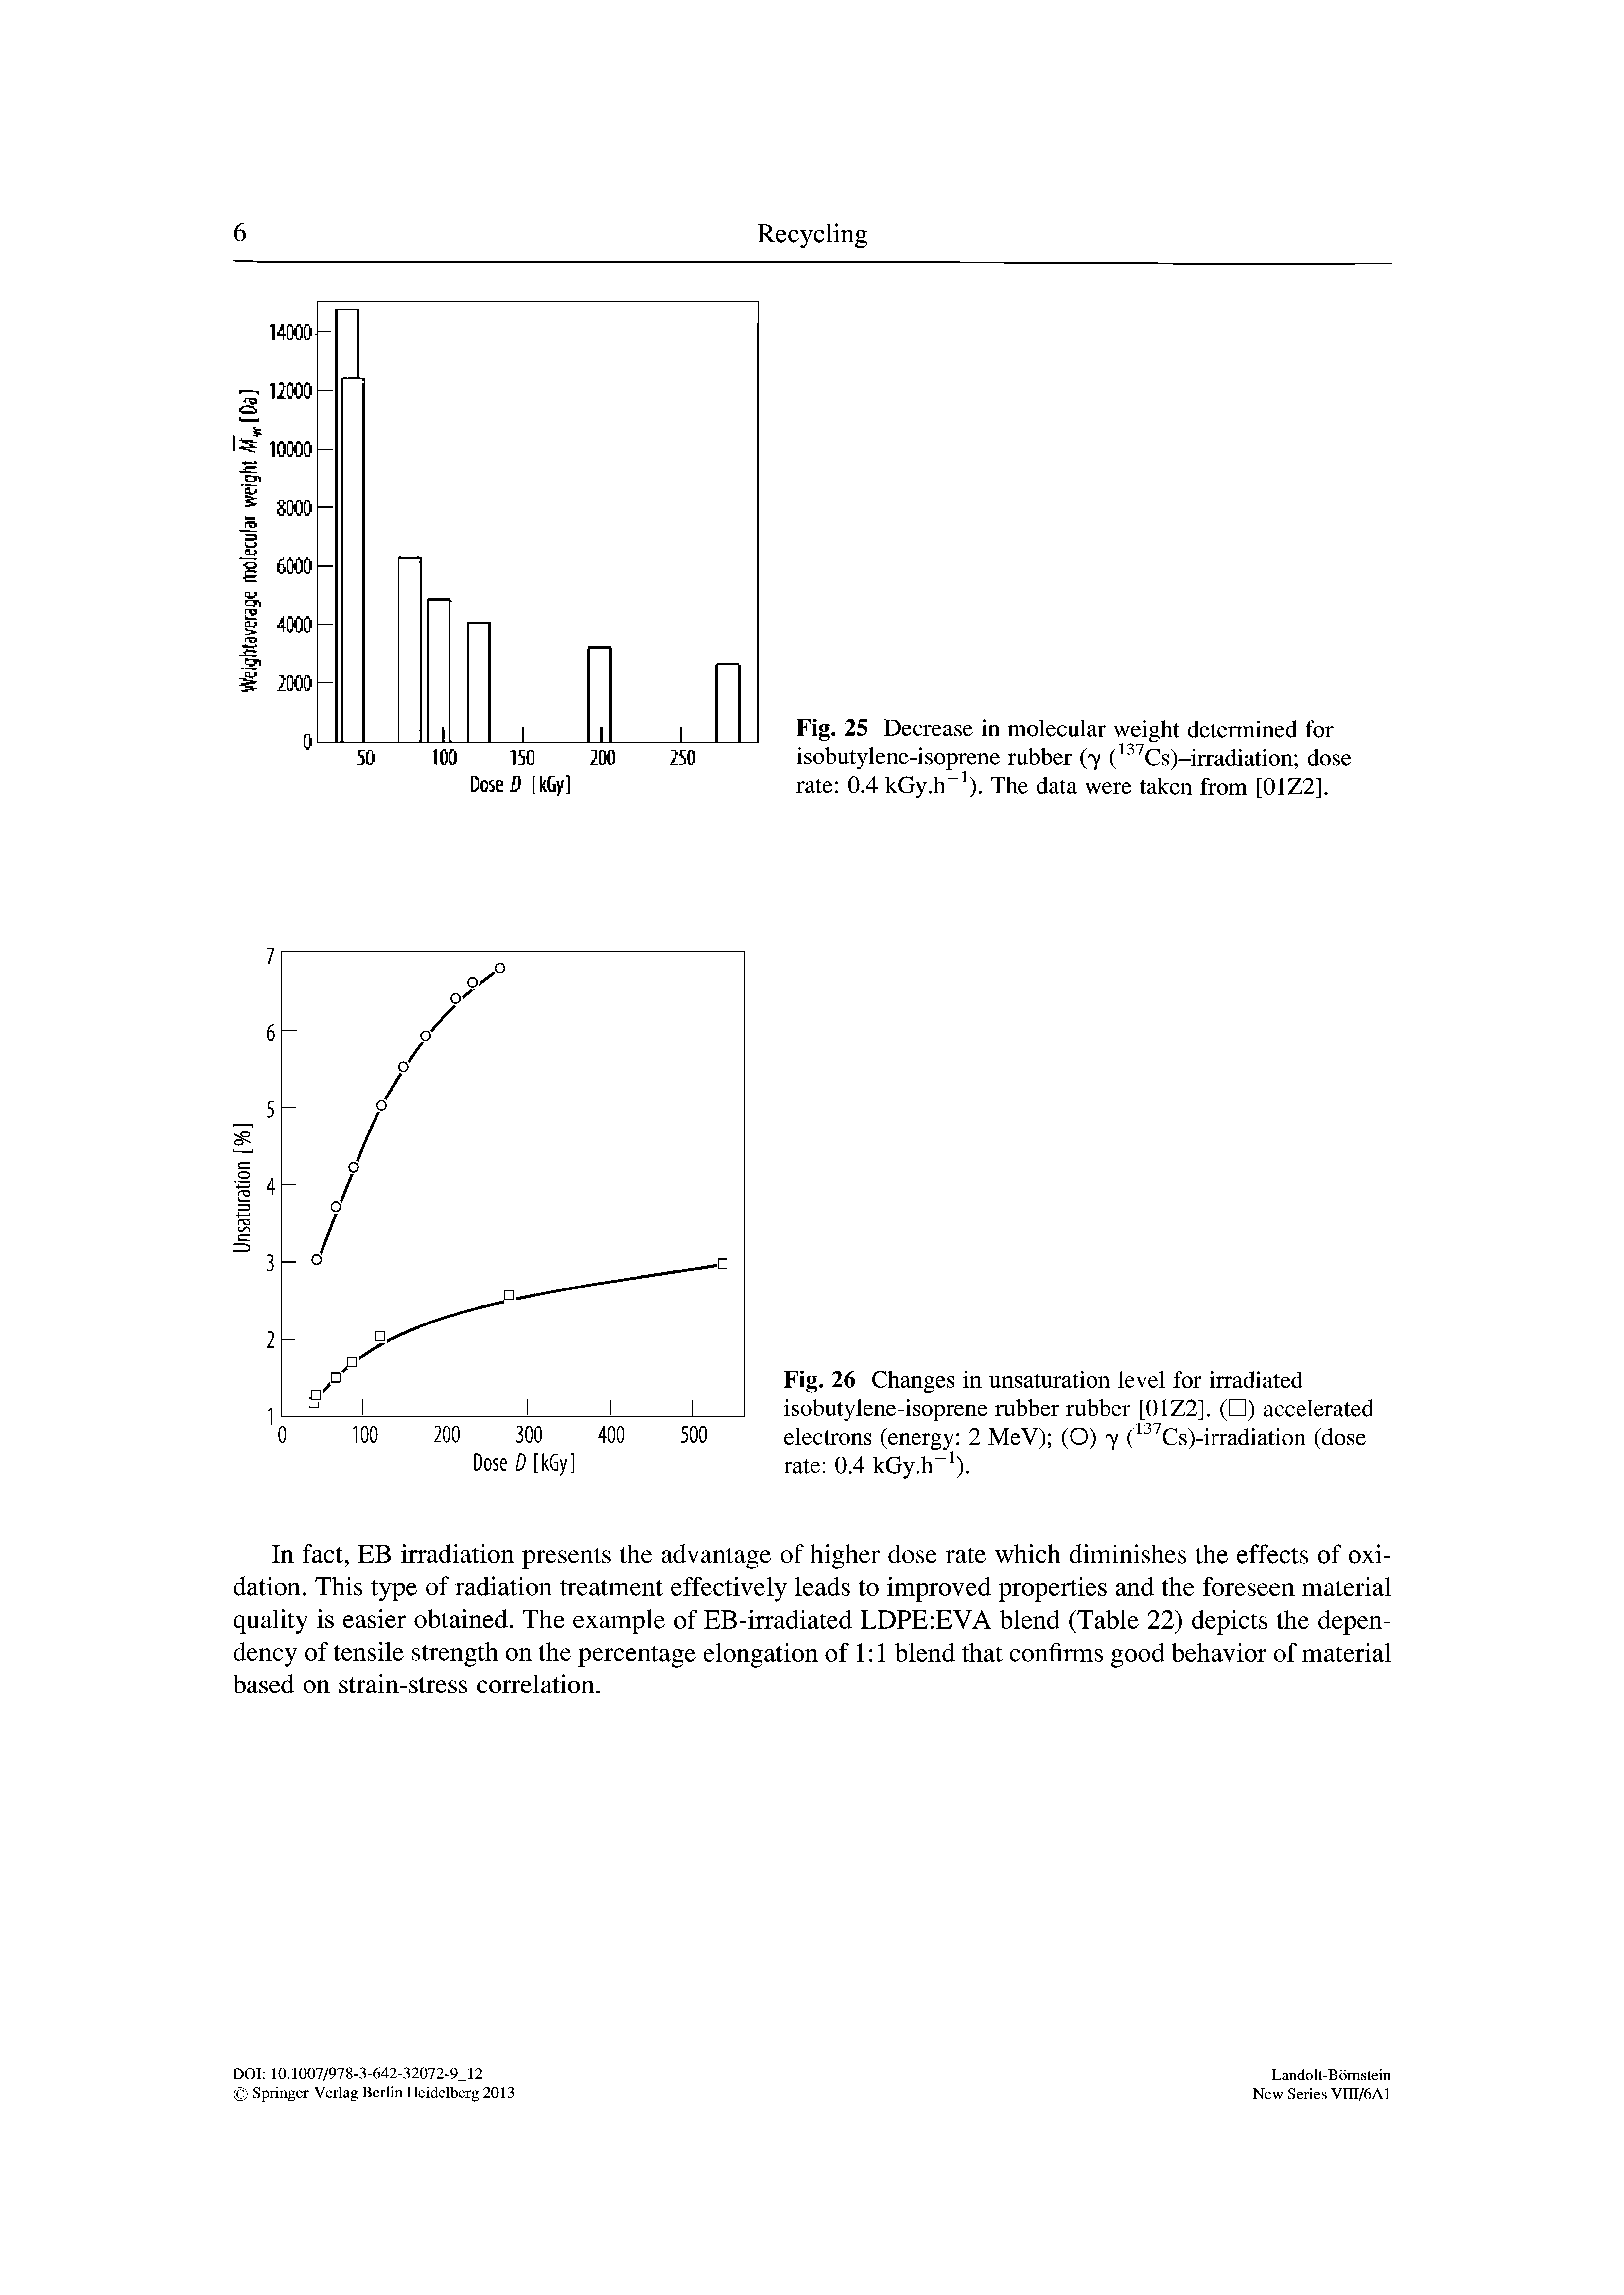 Fig. 25 Decrease in molecular weight determined for isobutylene-isoprene rubber (7 ( Cs)-irradiation dose rate 0.4 kGy.h ). The data were taken from [01Z2].